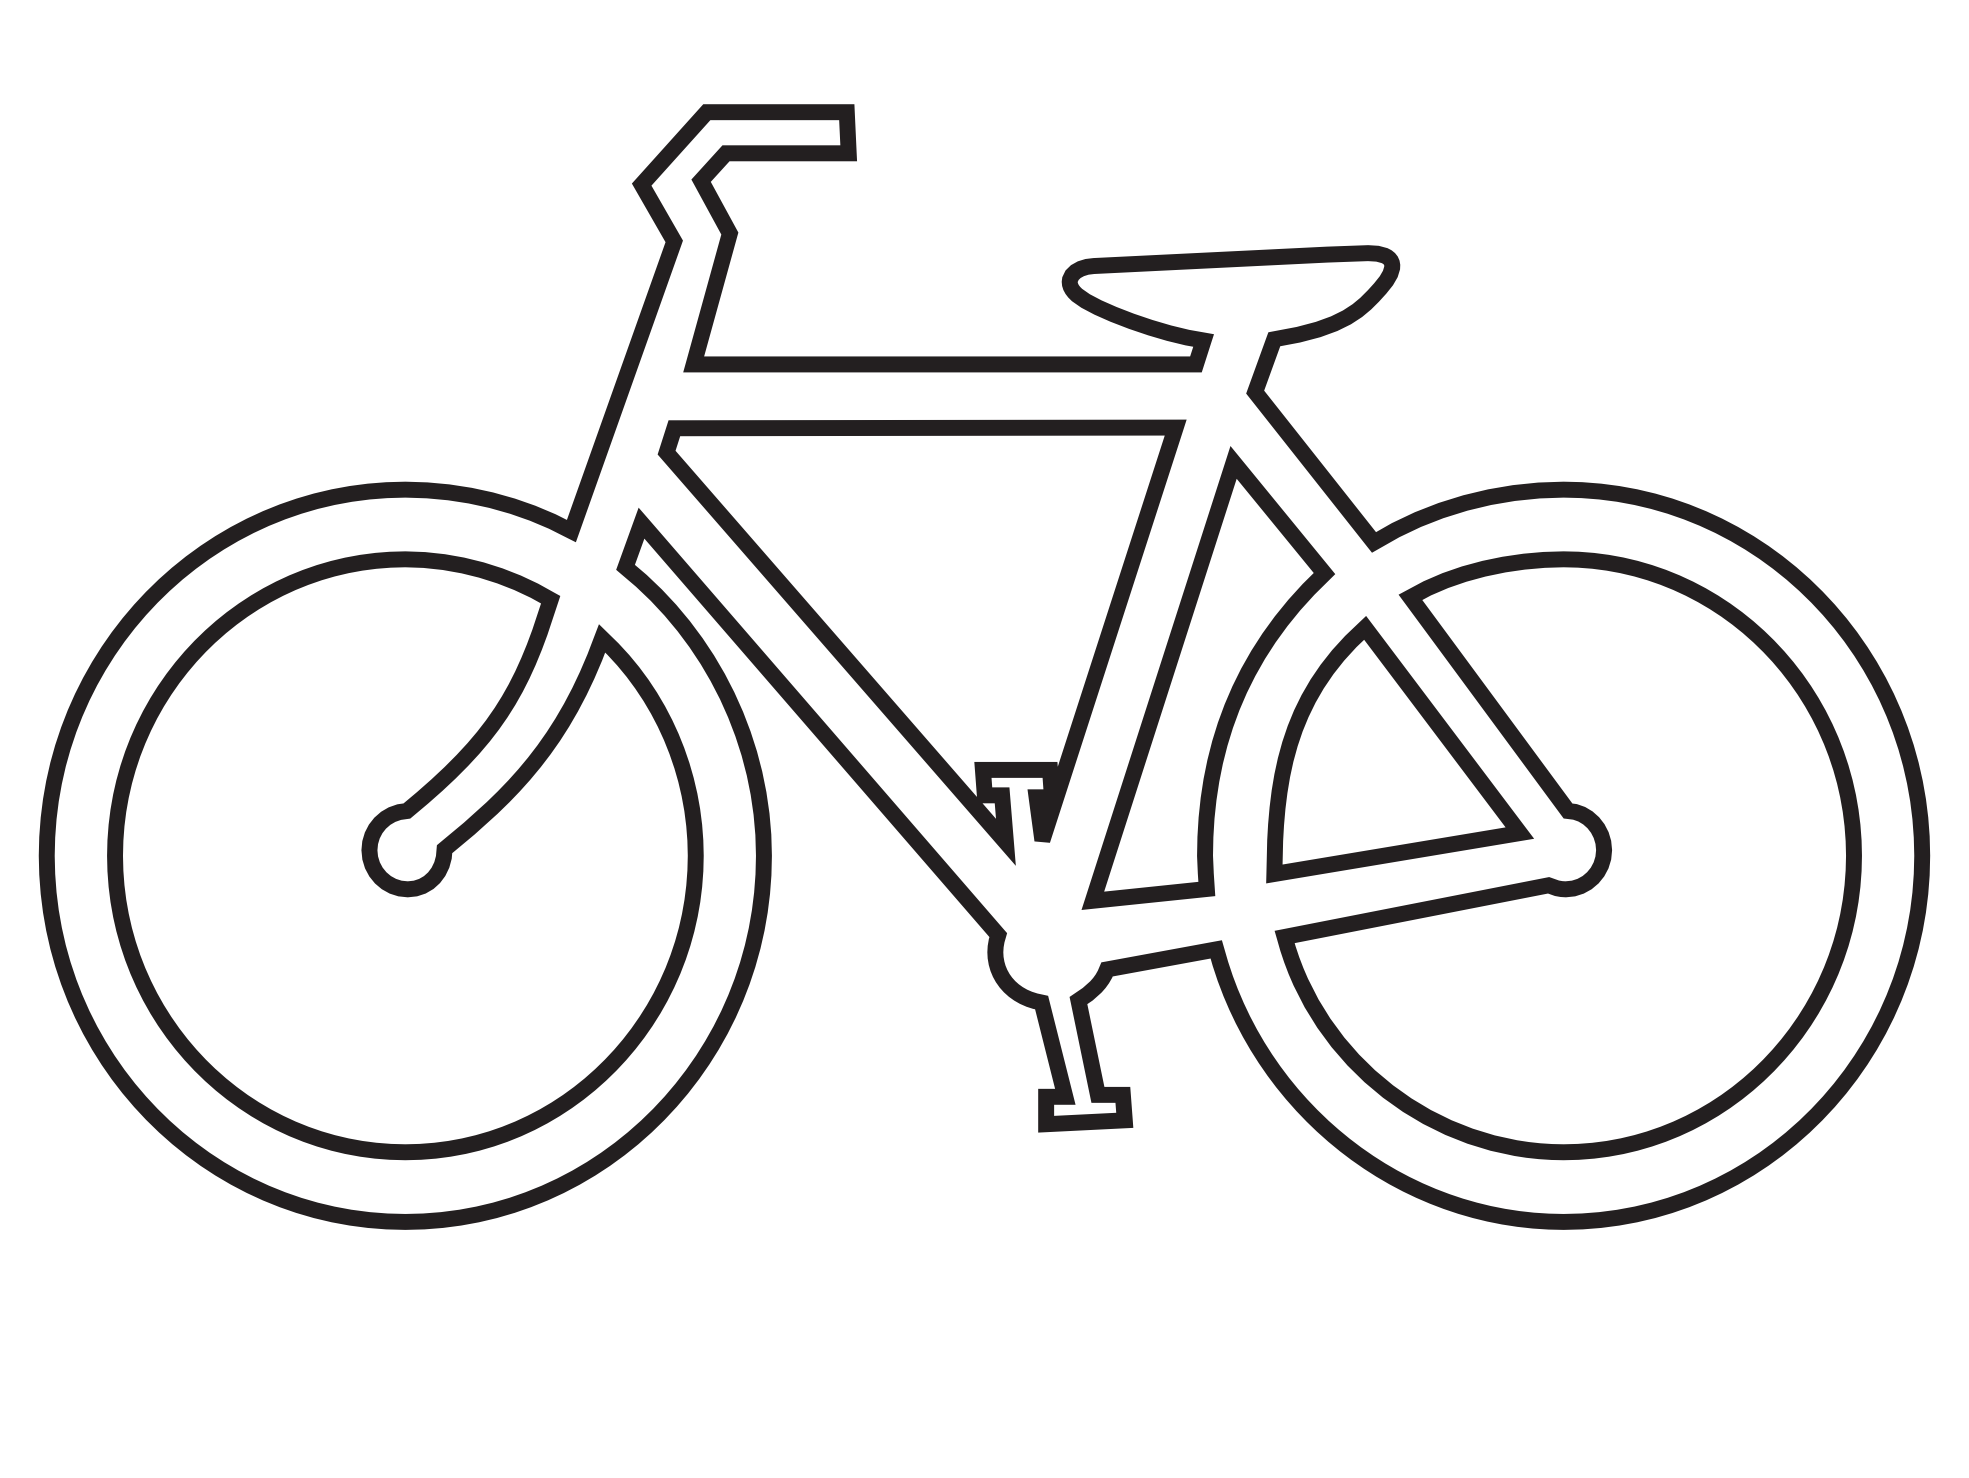 clipartist.net » Clip Art » bicycle route sign black white line ...